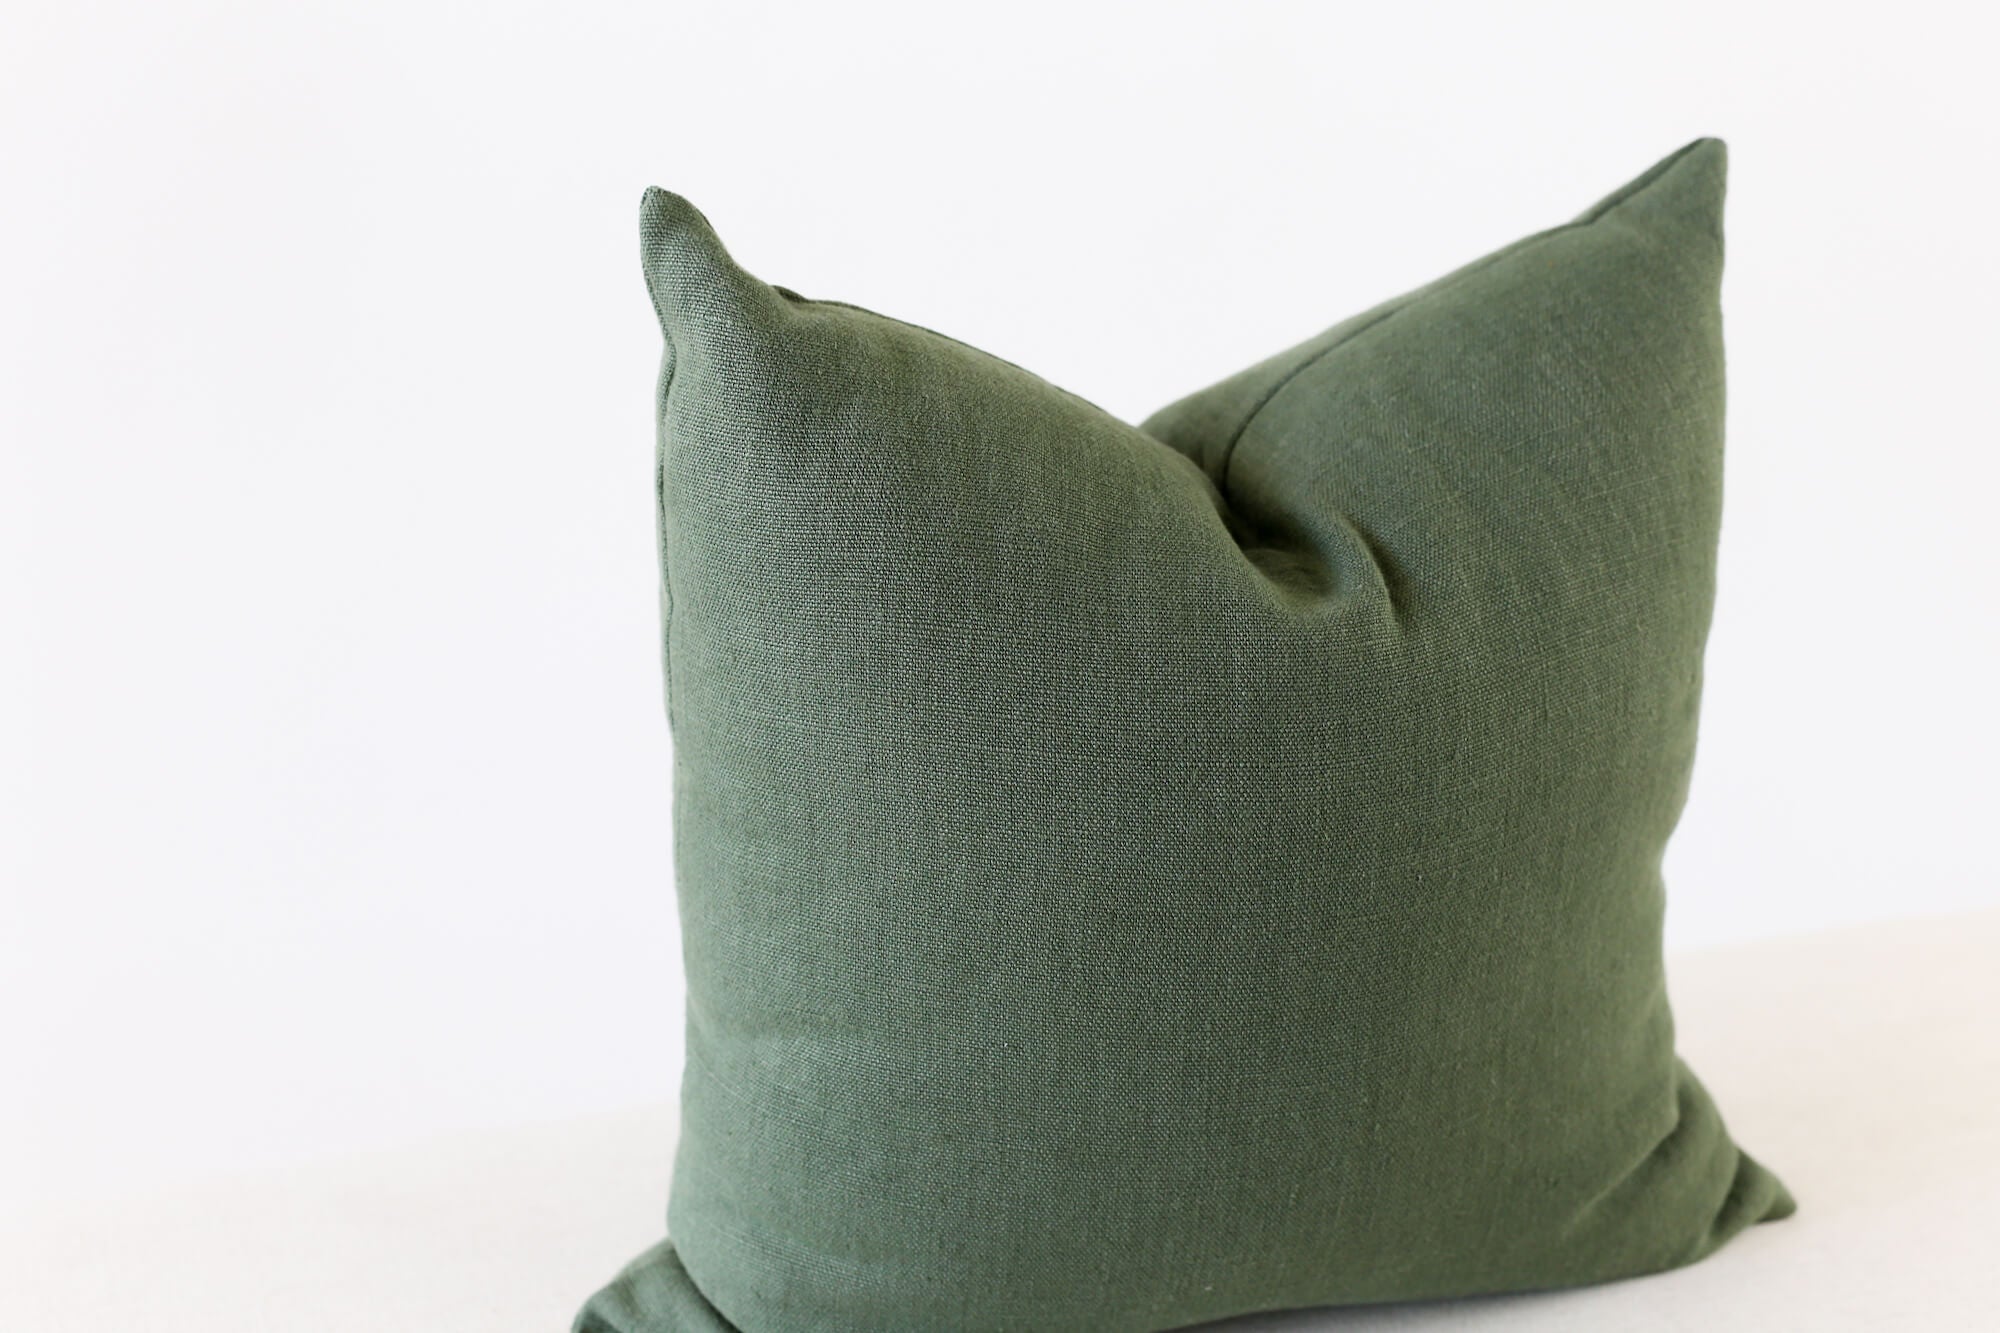 https://cdn.shopify.com/s/files/1/0083/0655/6991/products/green-linen-pillow-cover-laurel-and-blush-3_2000x.jpg?v=1687969657